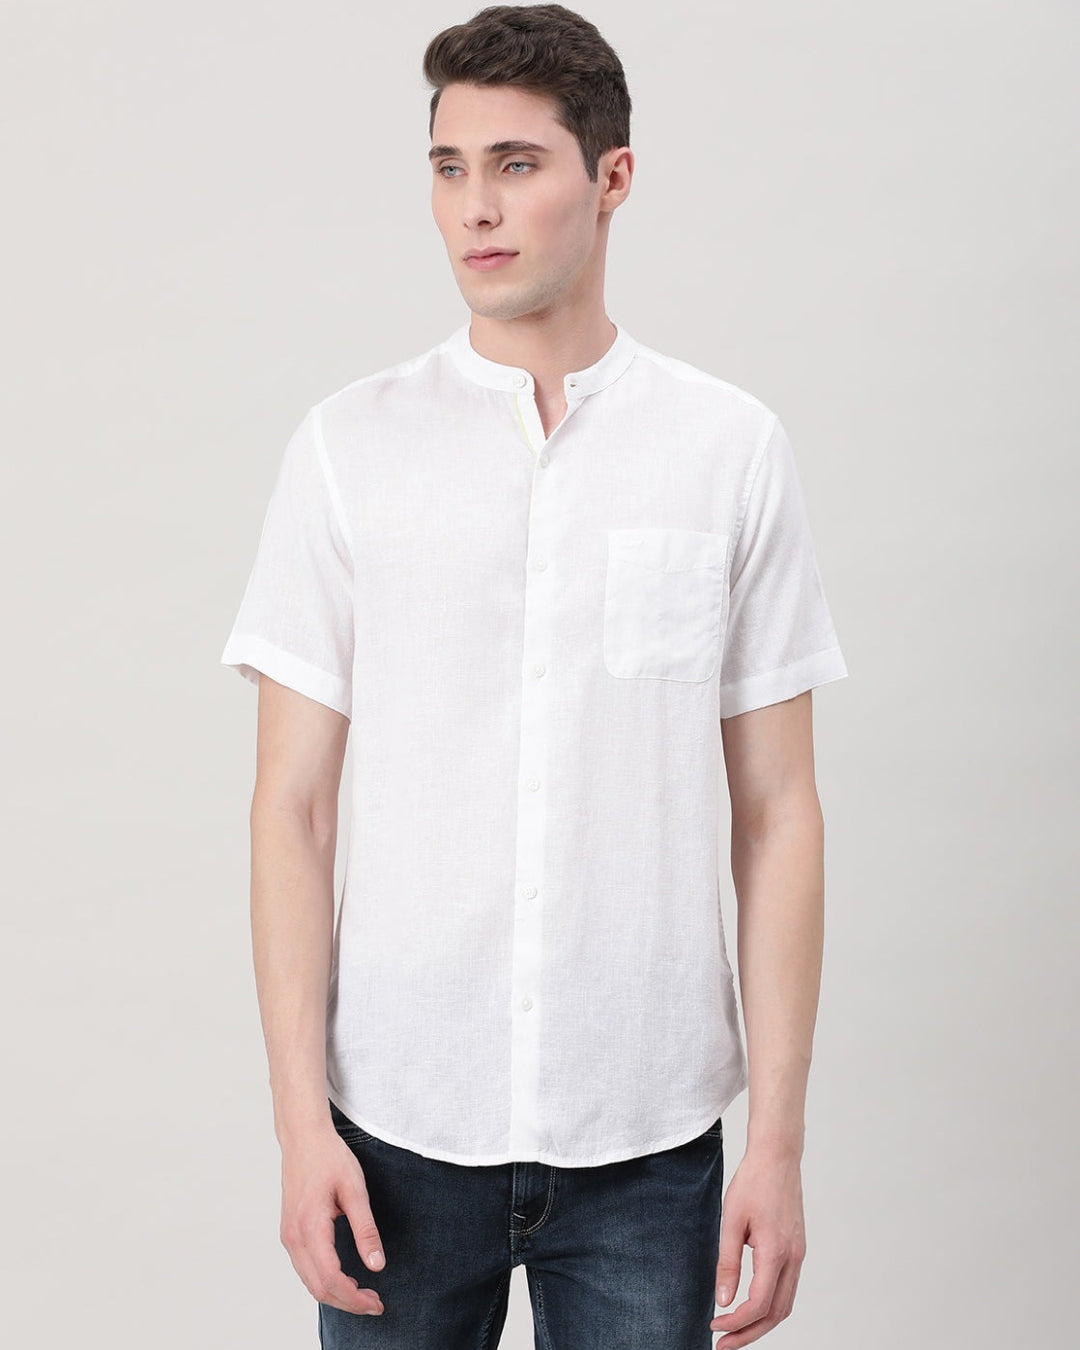 Casual White Half Sleeve Comfort Fit Solid Shirt with Collar for Men